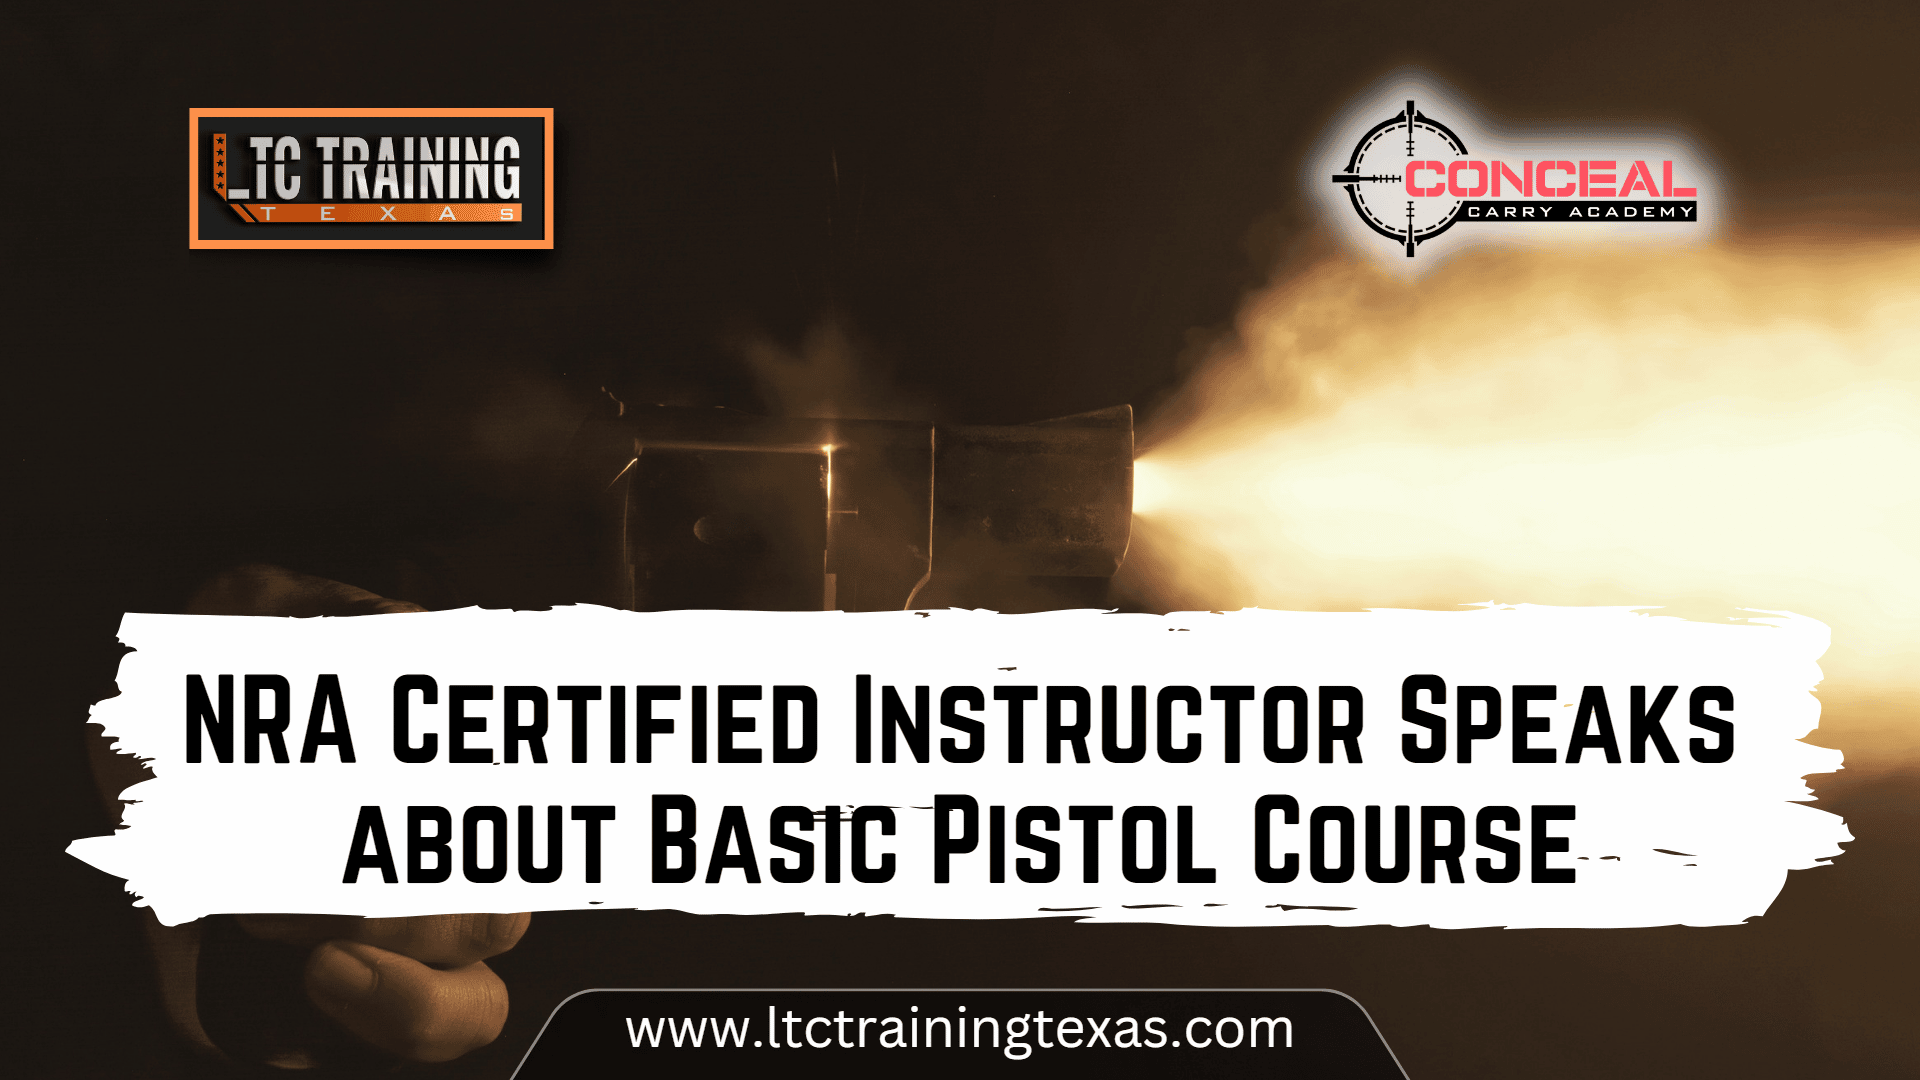 NRA Certified Instructor Speaks about Basic Pistol Course